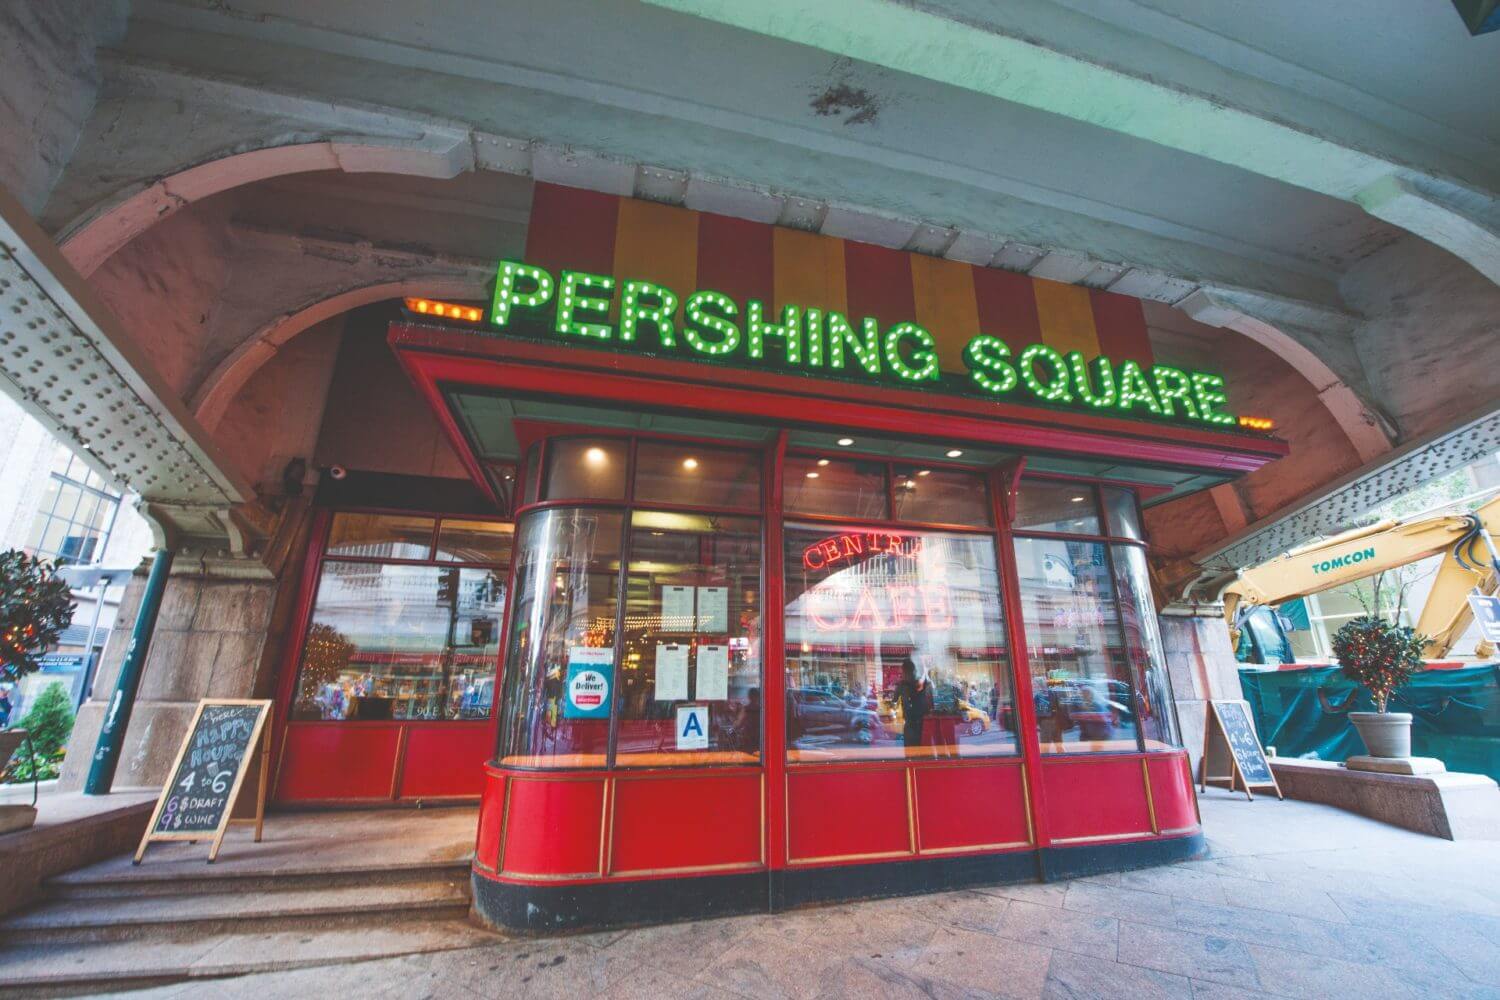 Pershing Square Cafe - Photo credit: Fantrippers